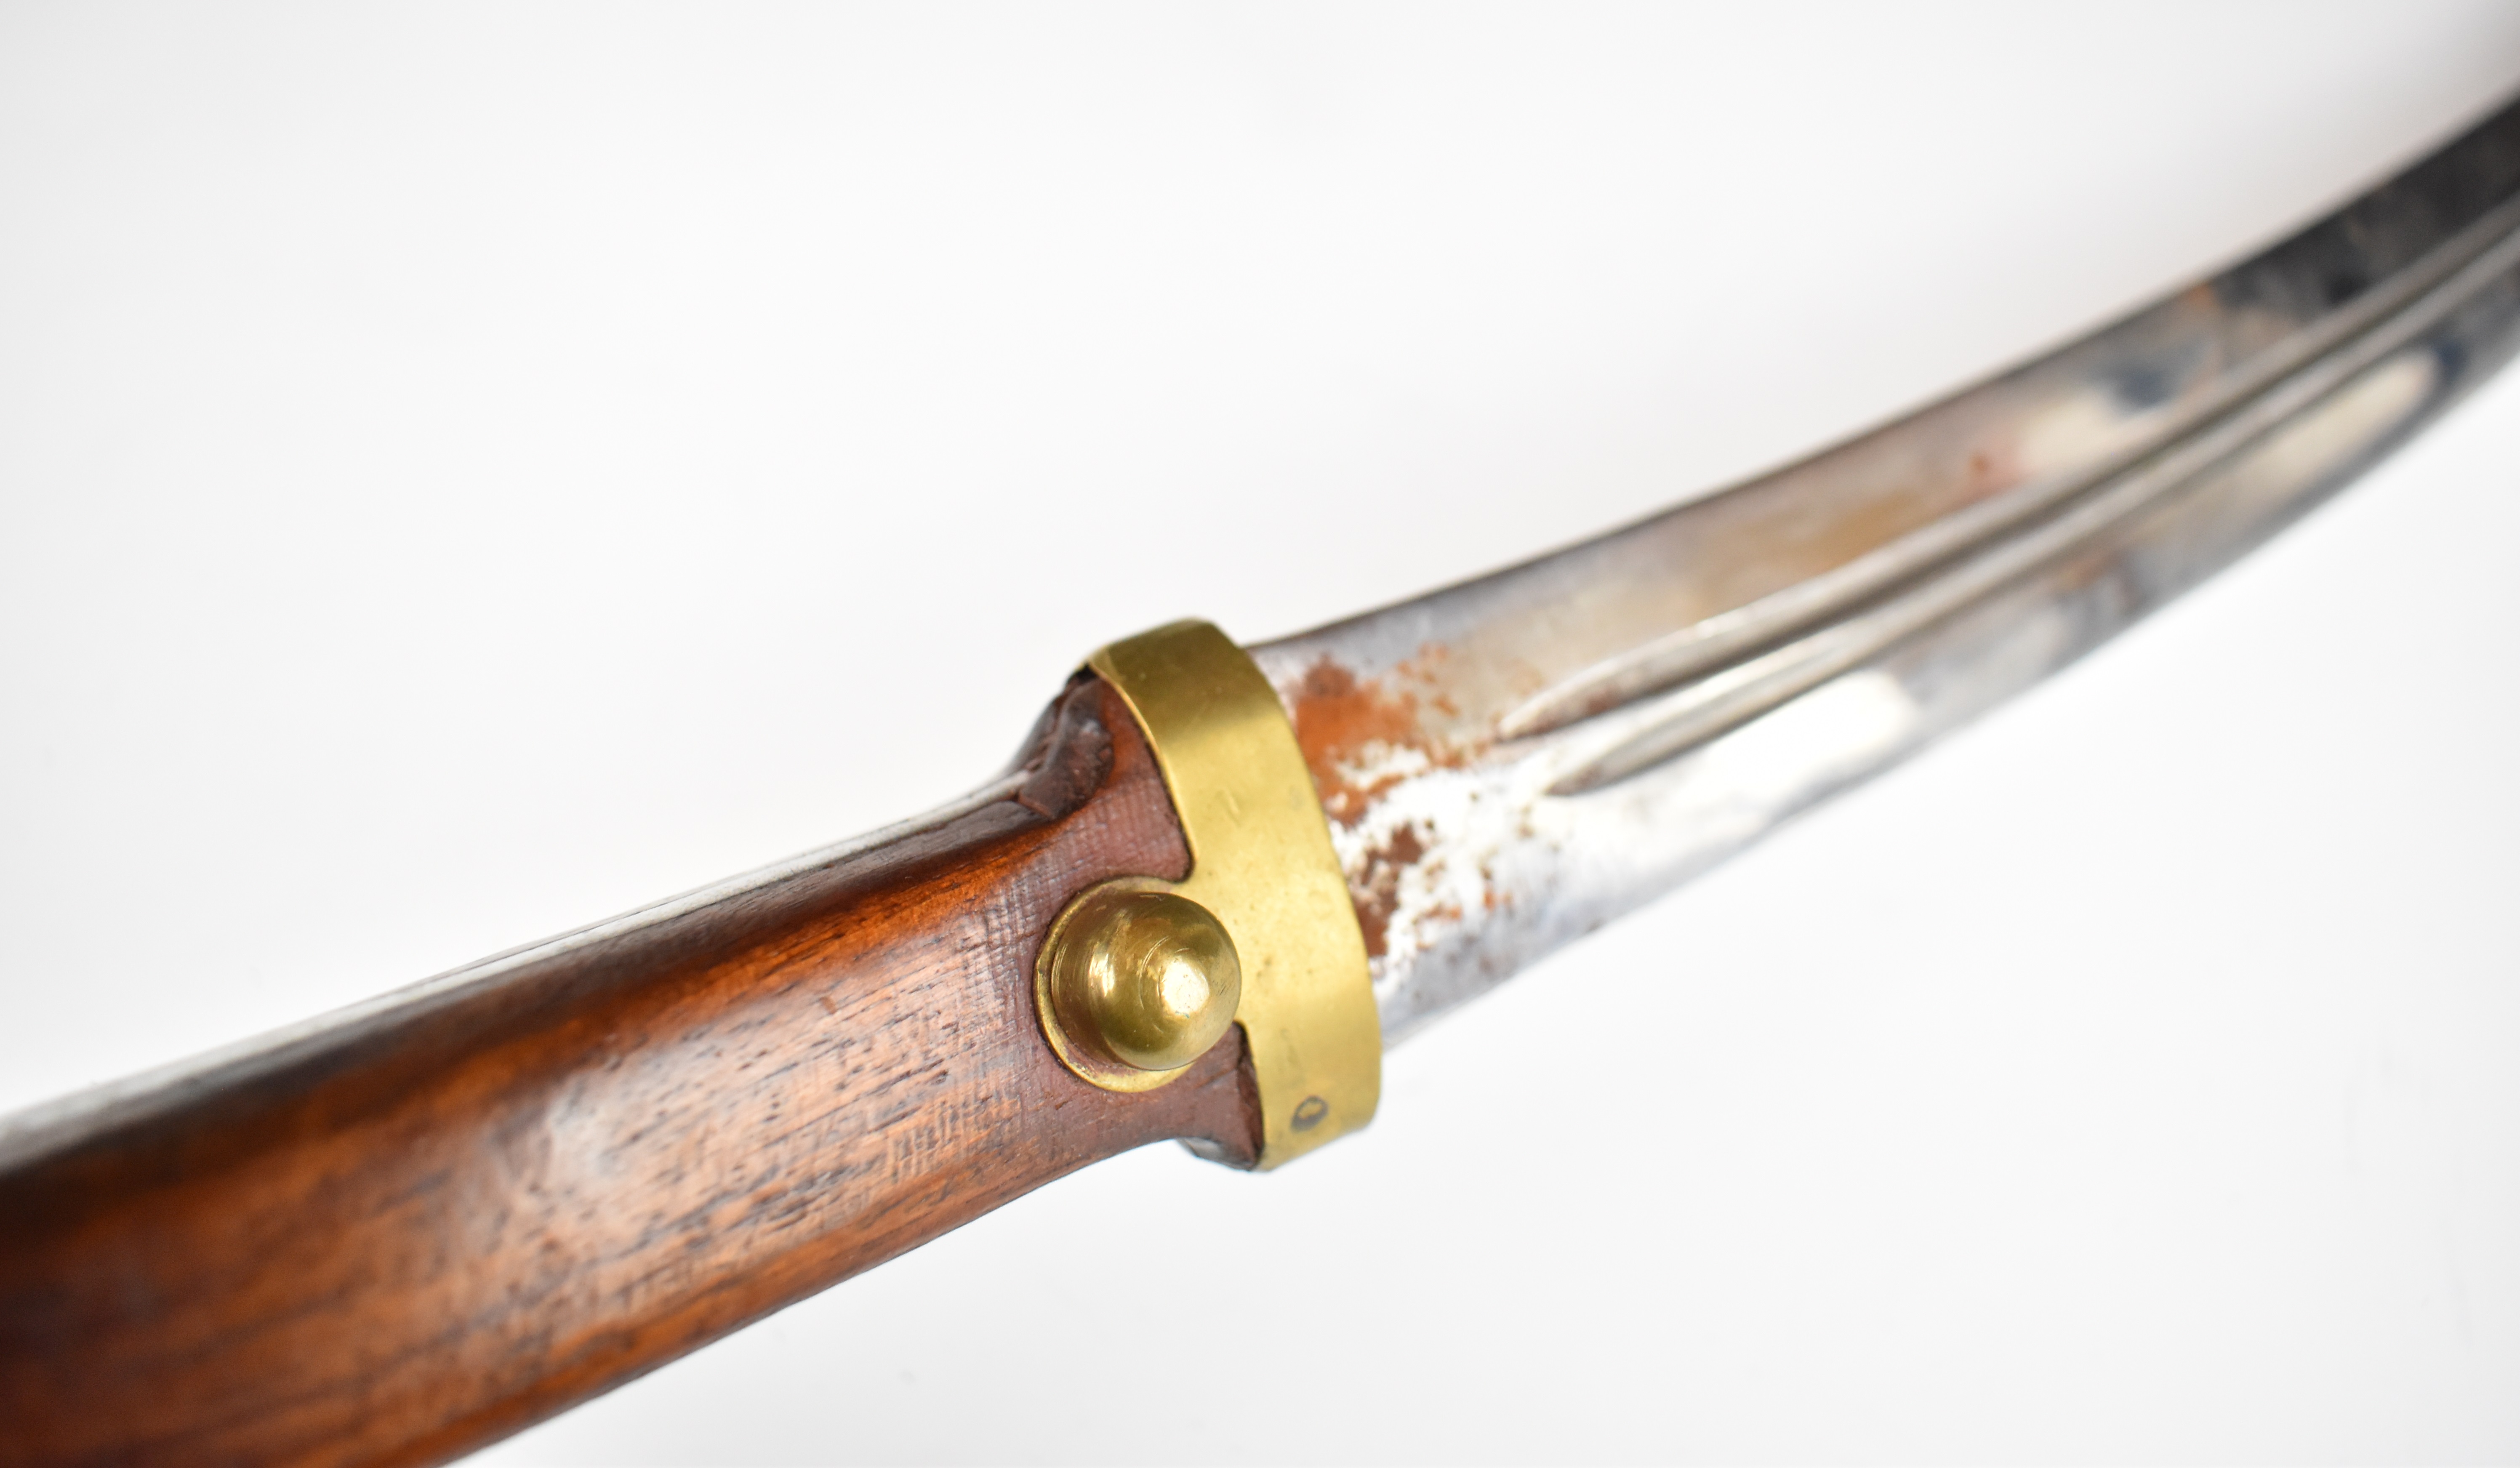 Continental short sword with wooden grips, 44cm double fullered curved blade, leather covered sheath - Image 5 of 6